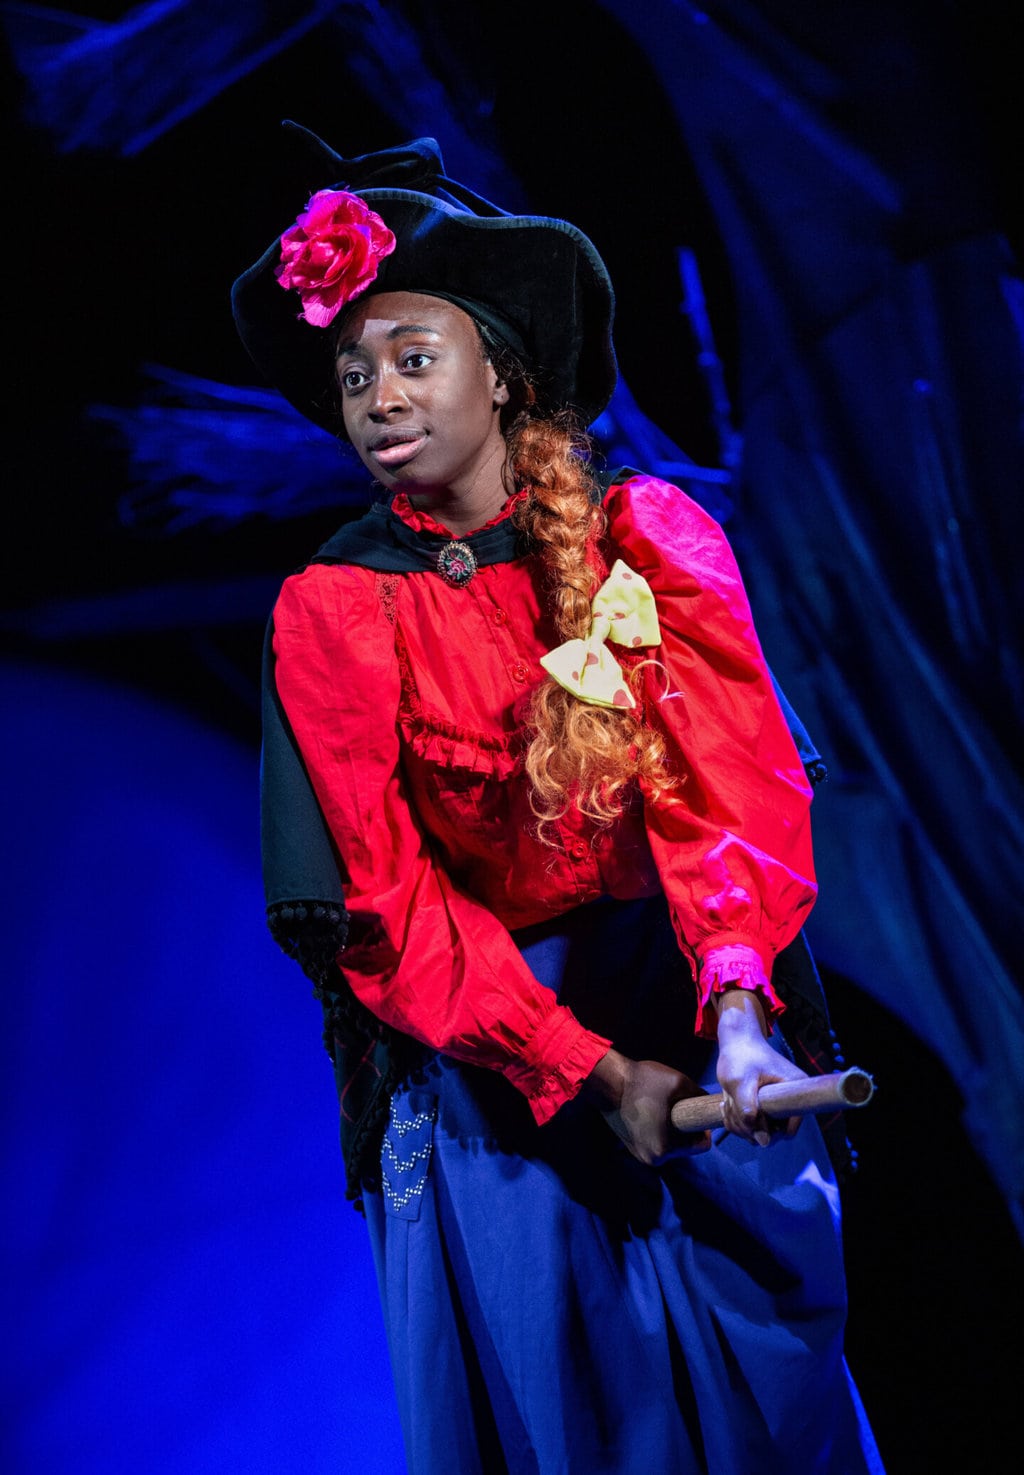 Room on the Broom on Stage | Review